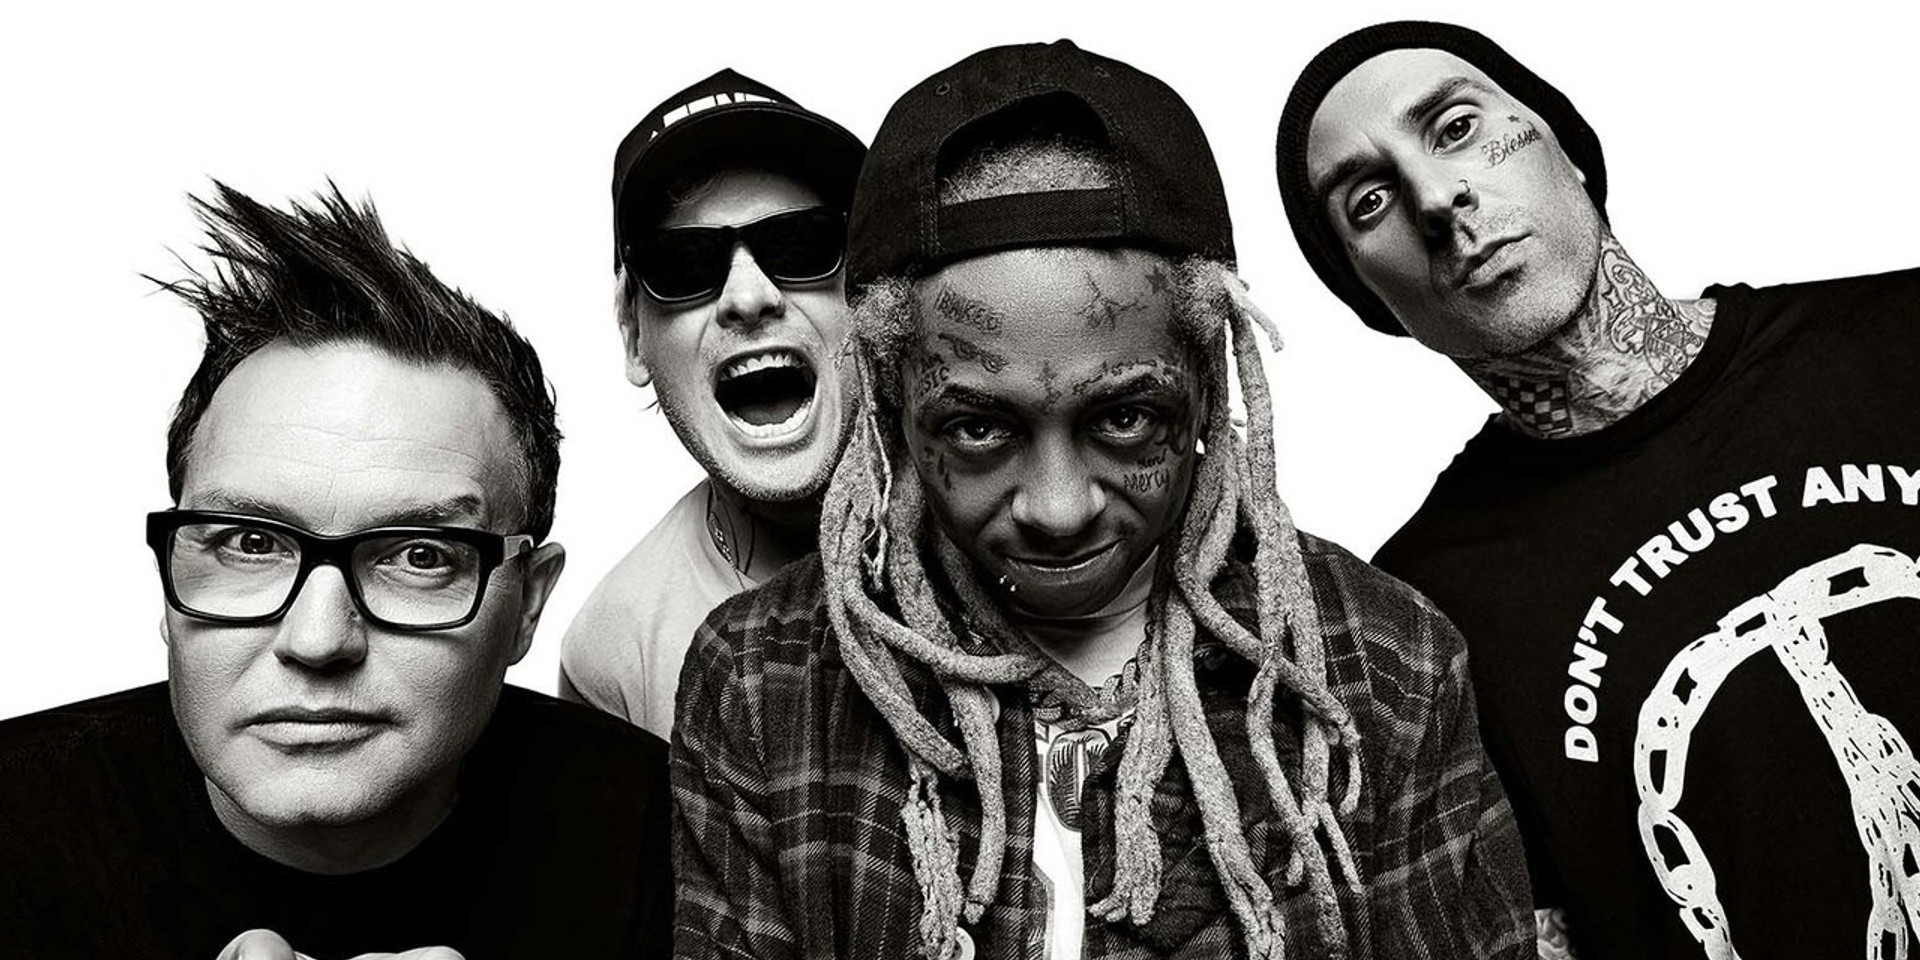 Blink-182 and Lil Wayne release mashup of ‘What’s My Age Again / A Milli’ – watch